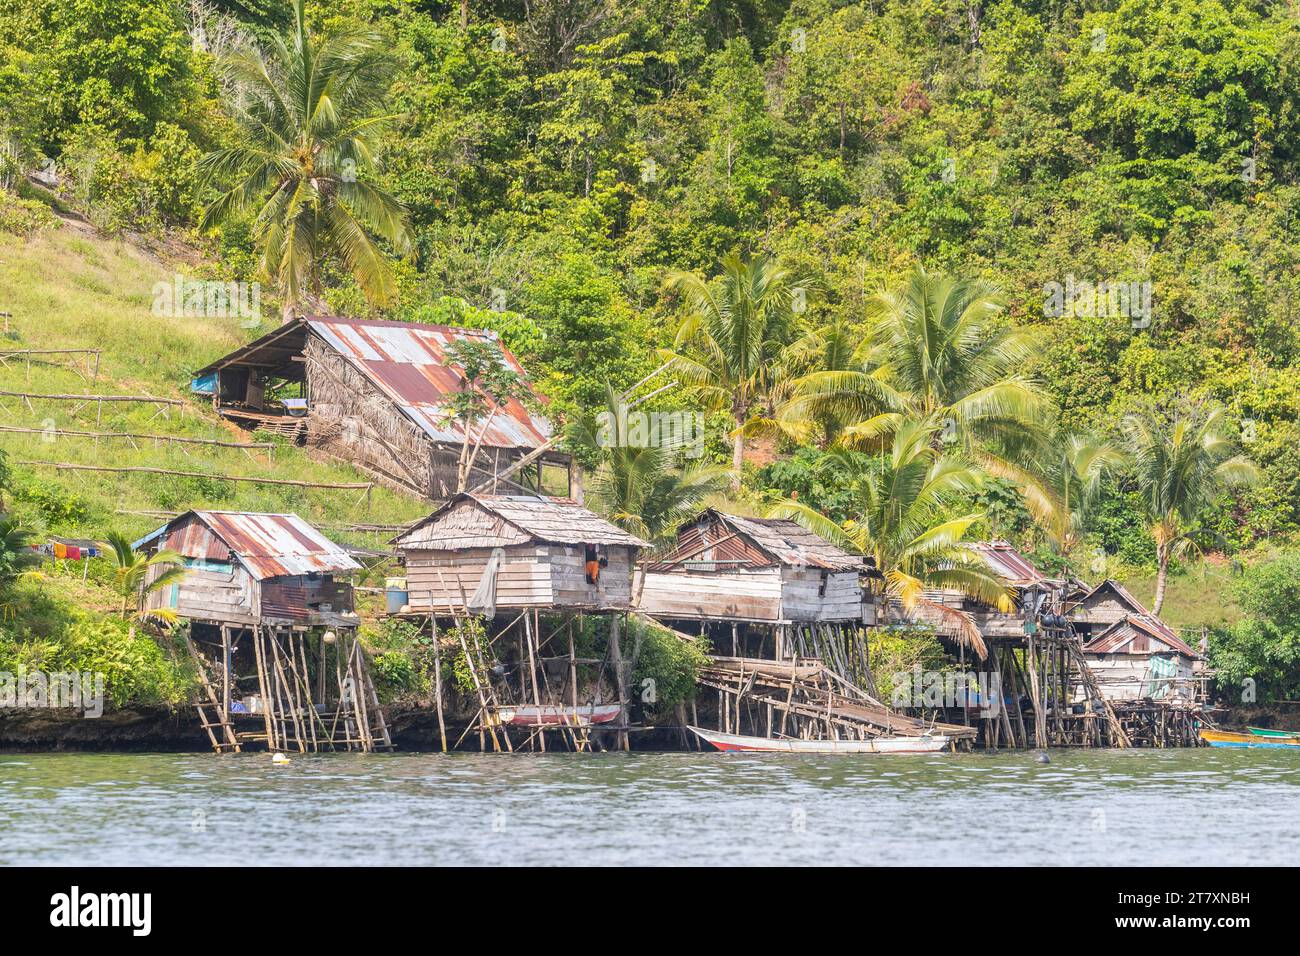 Ranger stations built on the water in Tanjung Puting National Park, Kalimantan, Borneo, Indonesia, Southeast Asia, Asia Stock Photo